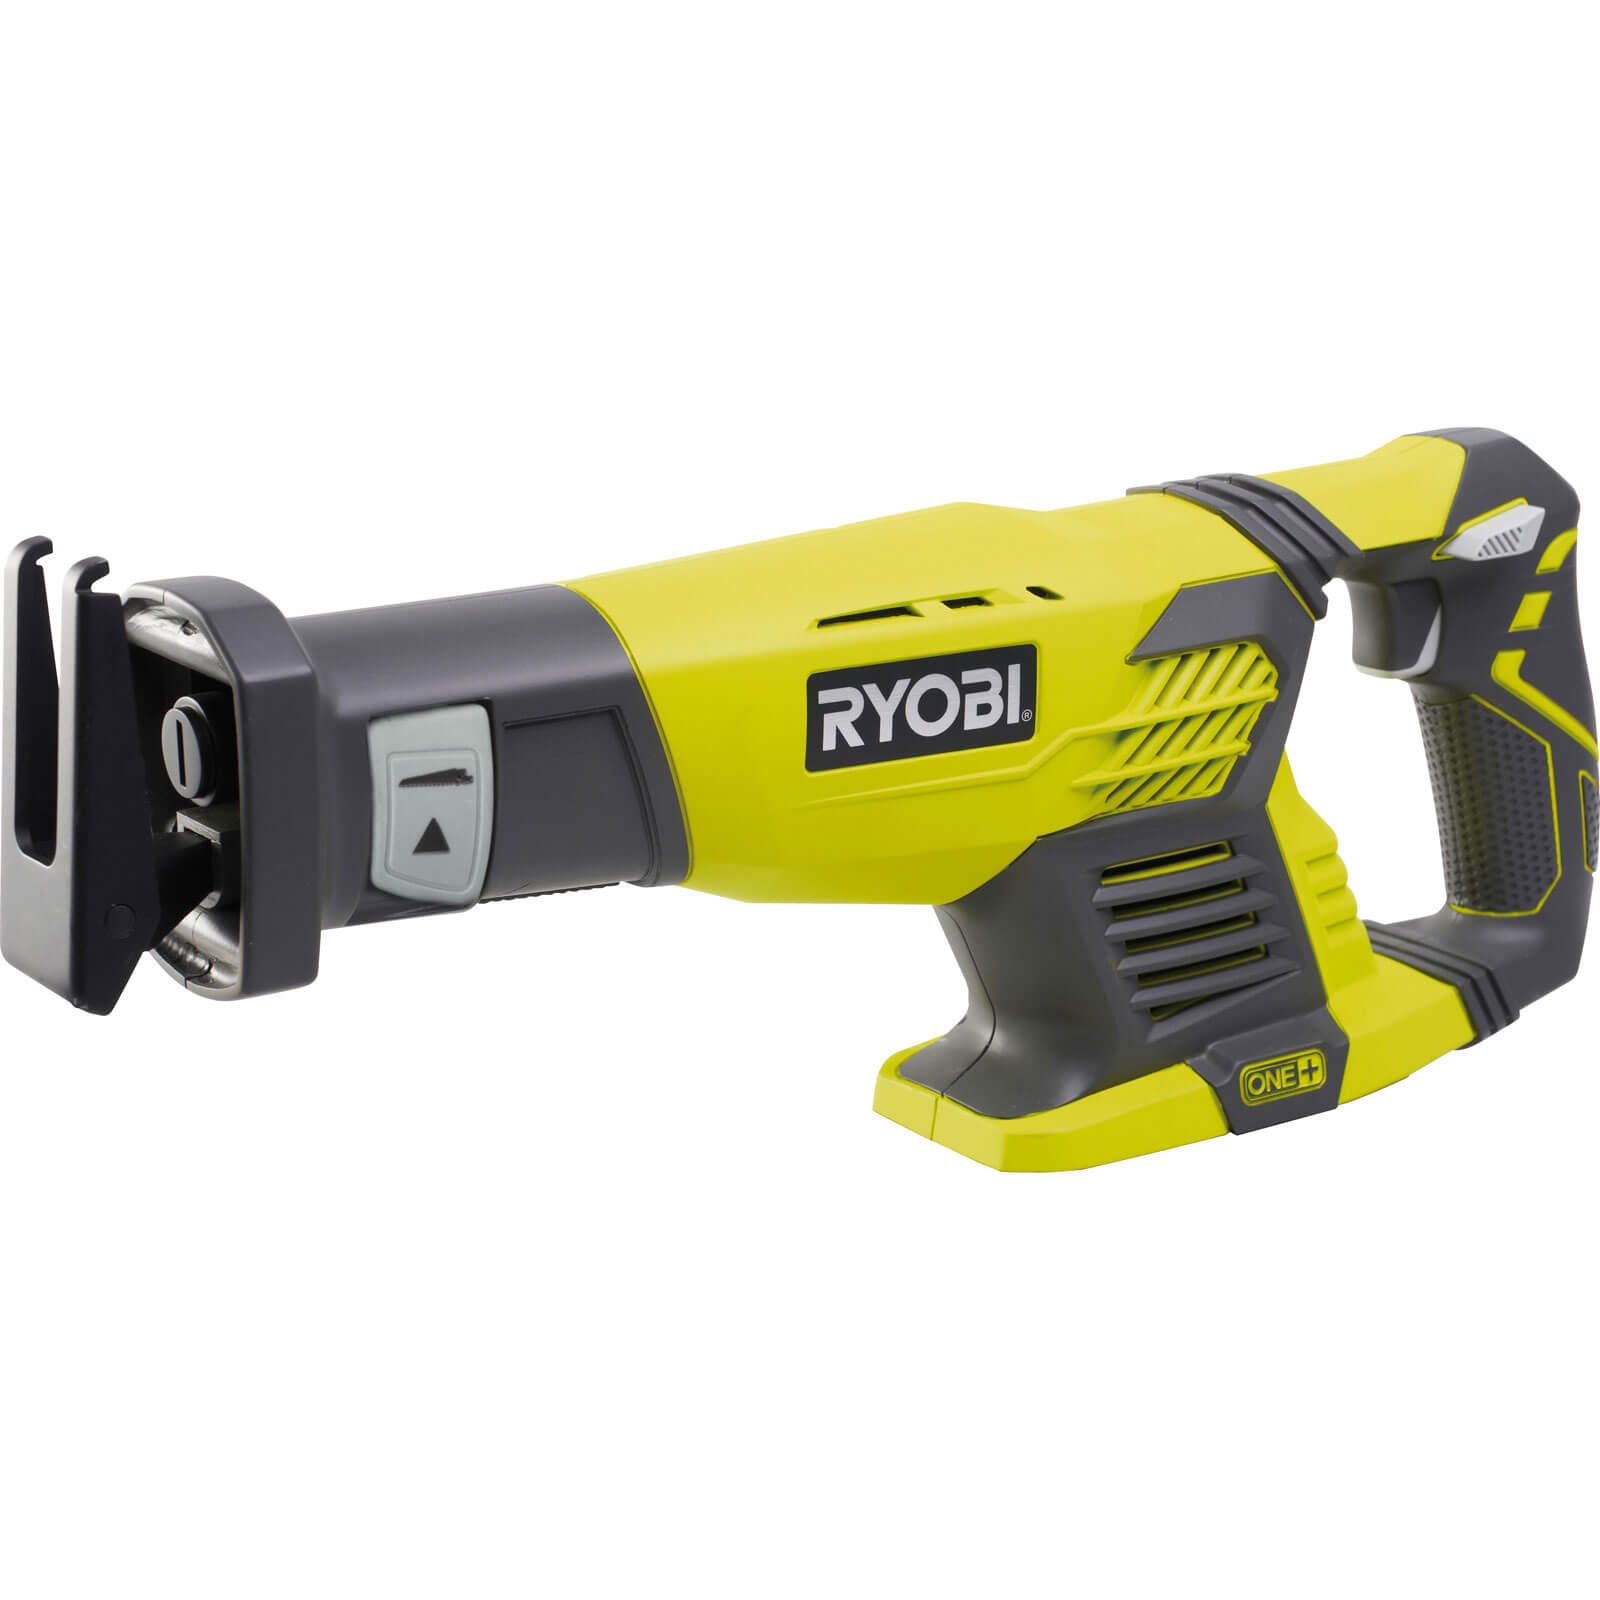 Ryobi RRS1801M ONE+ 18v Cordless Reciprocating Saw without Battery or Charger - Requires Separate ON